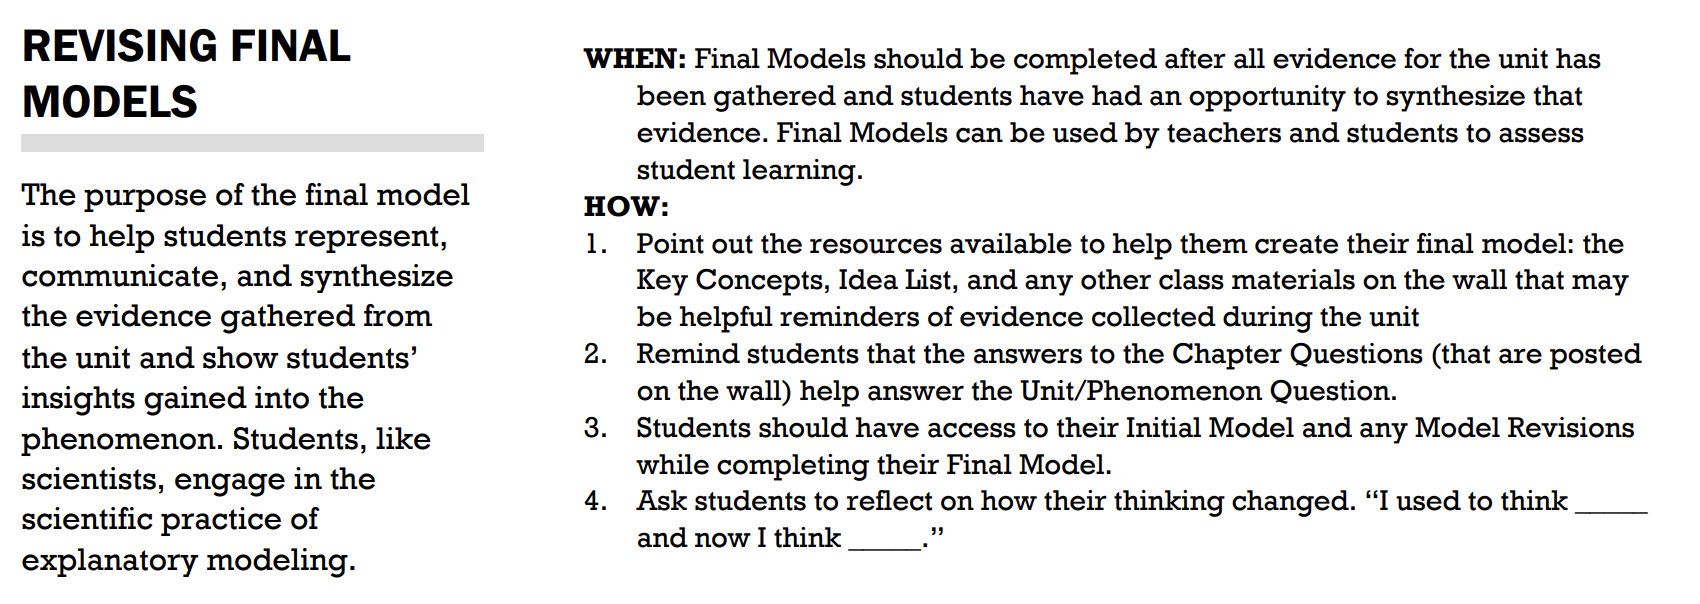 Explains advice on the purpose of revising final models and when and how to do it. Revising Final Models: The purpose of the final model is to help students represent, communicate, and synthesize the evidence gathered from the unit and show students' insights gained into the phenomenon. Students, like scientists, engage in the scientific practice of explanatory modeling. When: Final models should be completed after all evidence for the unit has been gathered and students have had an opportunity to synthesize that evidence. Final models can be used by teachers and students to assess student learning. How: 1. Point out the resources available to help them create their final model: the Key Concepts, Idea List, and any other class materials on the wall that may be helpful reminders of evidence collected during the unit. 2. Remind students that the answers to the Chapter Questions (that are posted on the wall) help answer the the Unit/Phenomenon Question. 3. Students should have access to their Initial Model and any Model Revisions while completing their Final Model. 4. Ask students to reflect on how their thinking changed. "I used to think __ and now I think __."